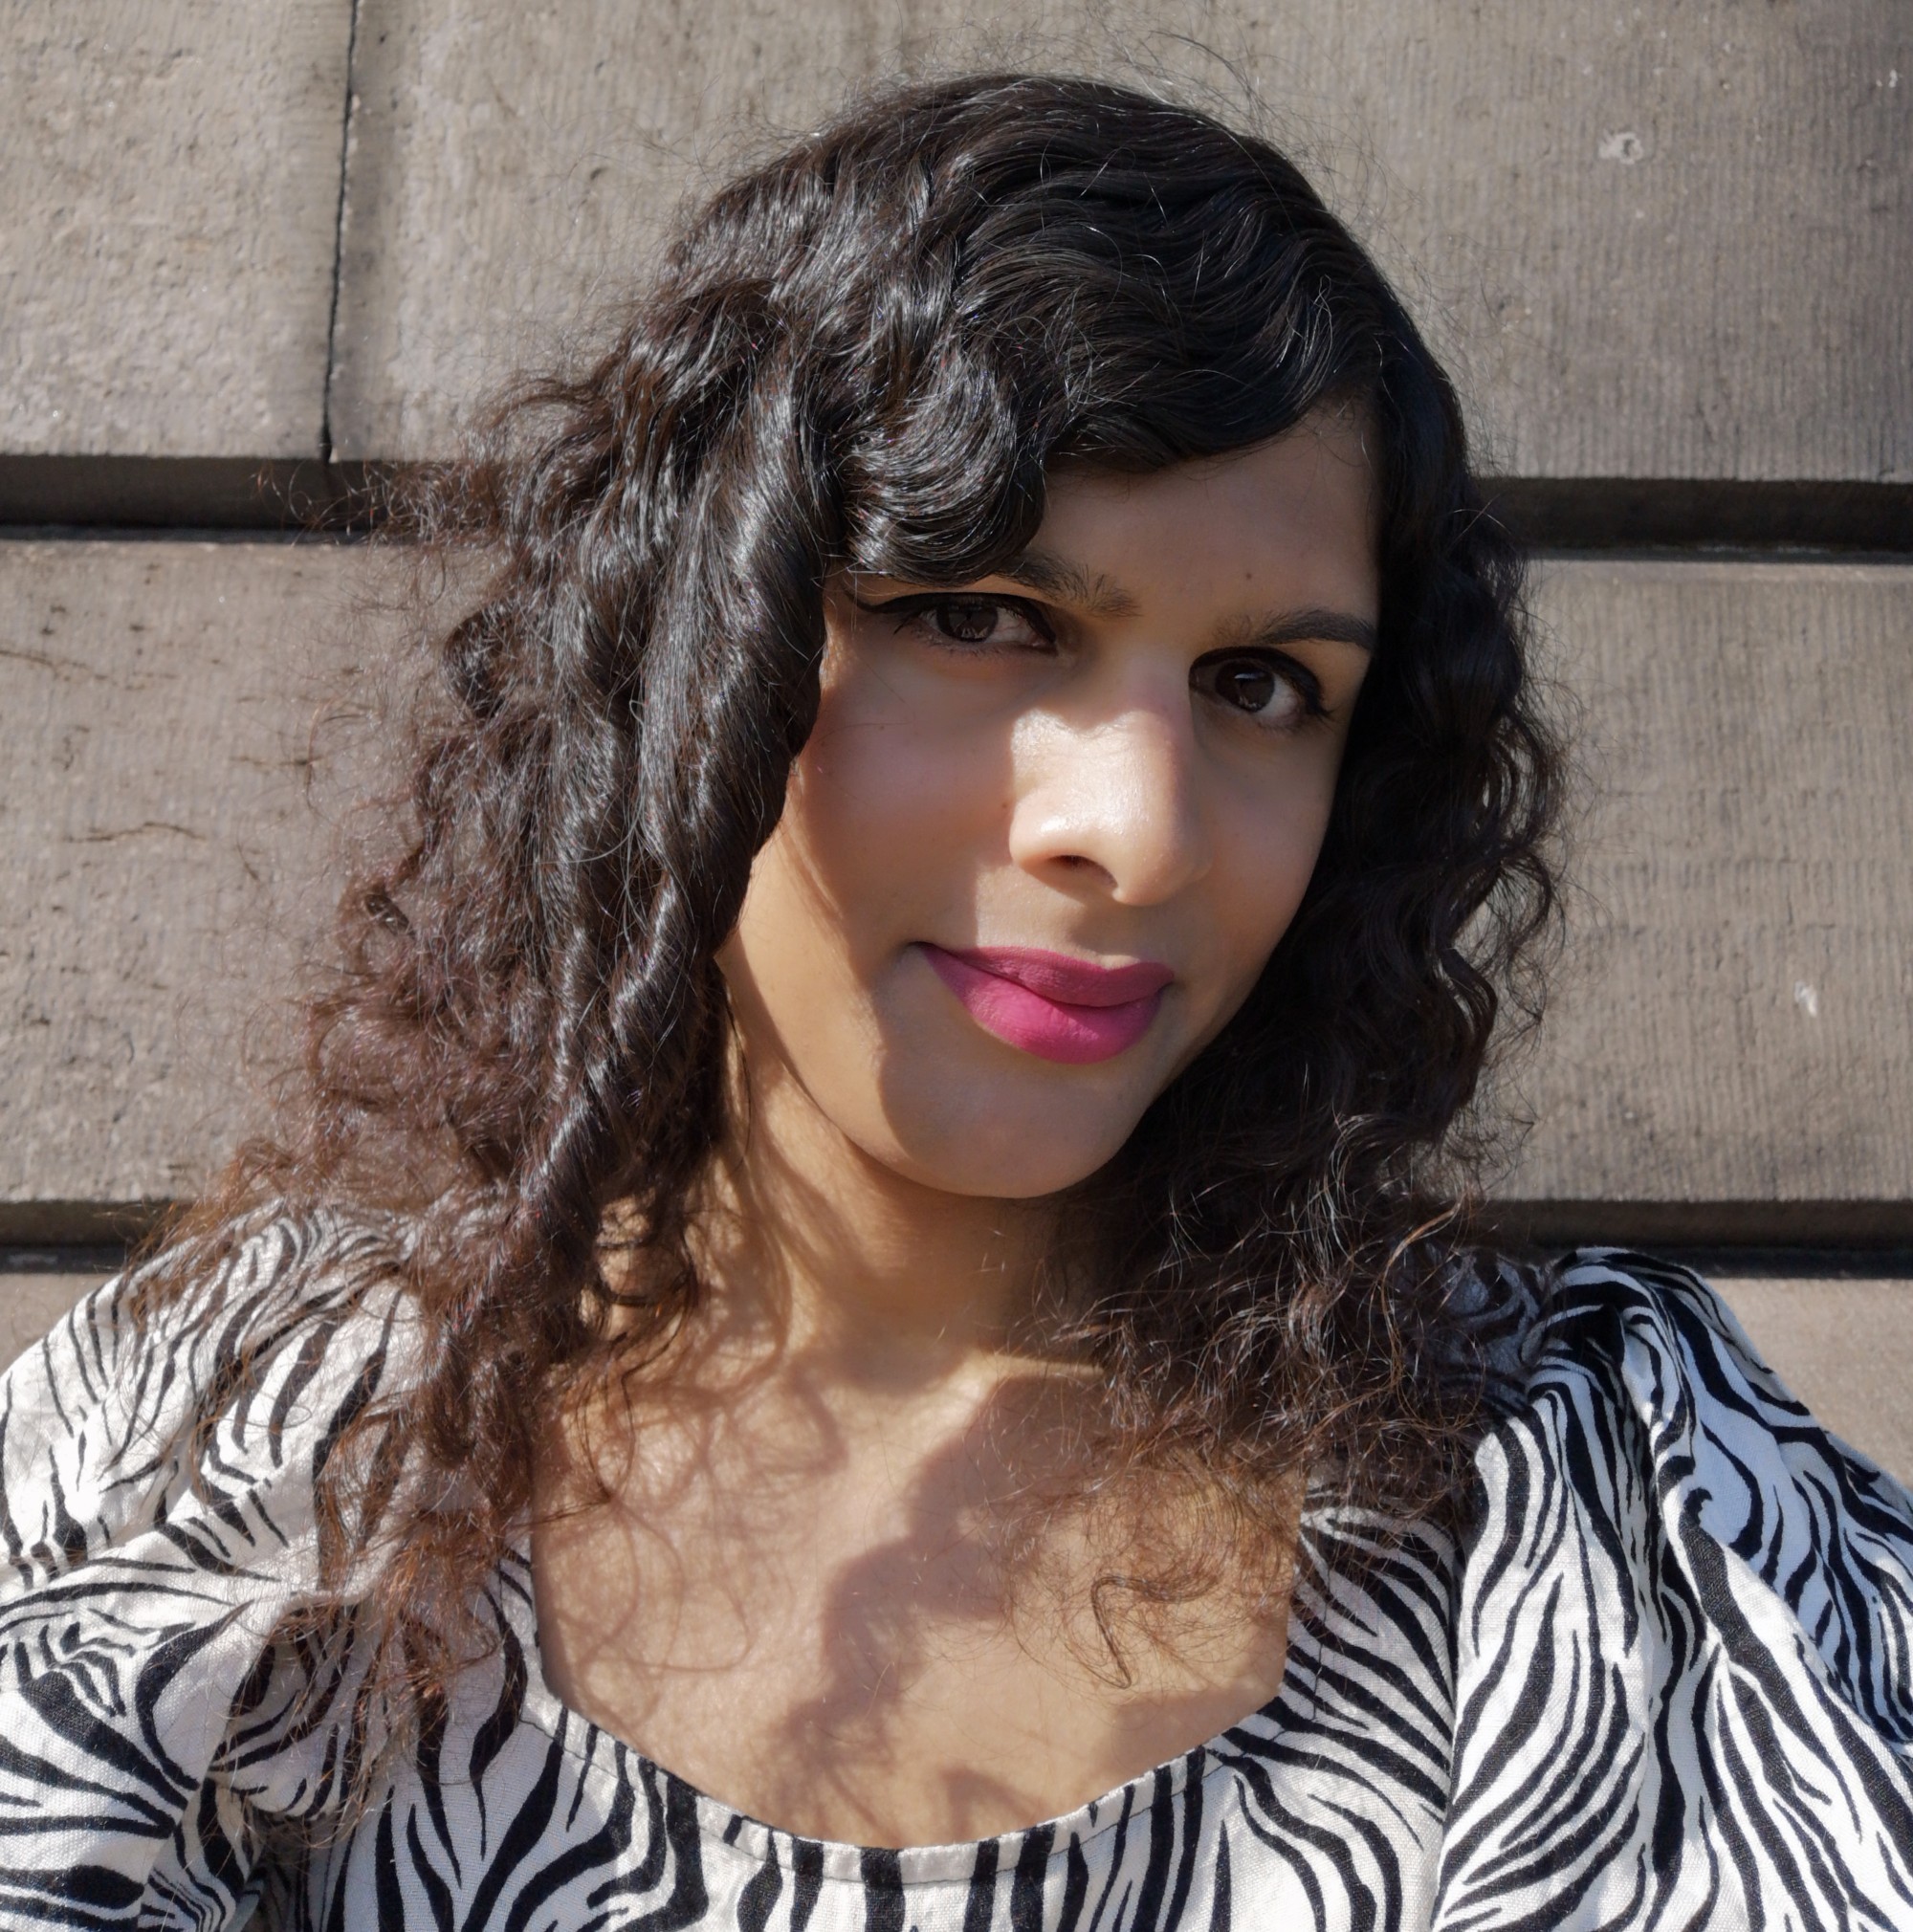 Image of Nat, a brown femme with long curly hair, wearing pinkish lipstick and a zebra-print dress. Her hair casts shadows over her neckline.